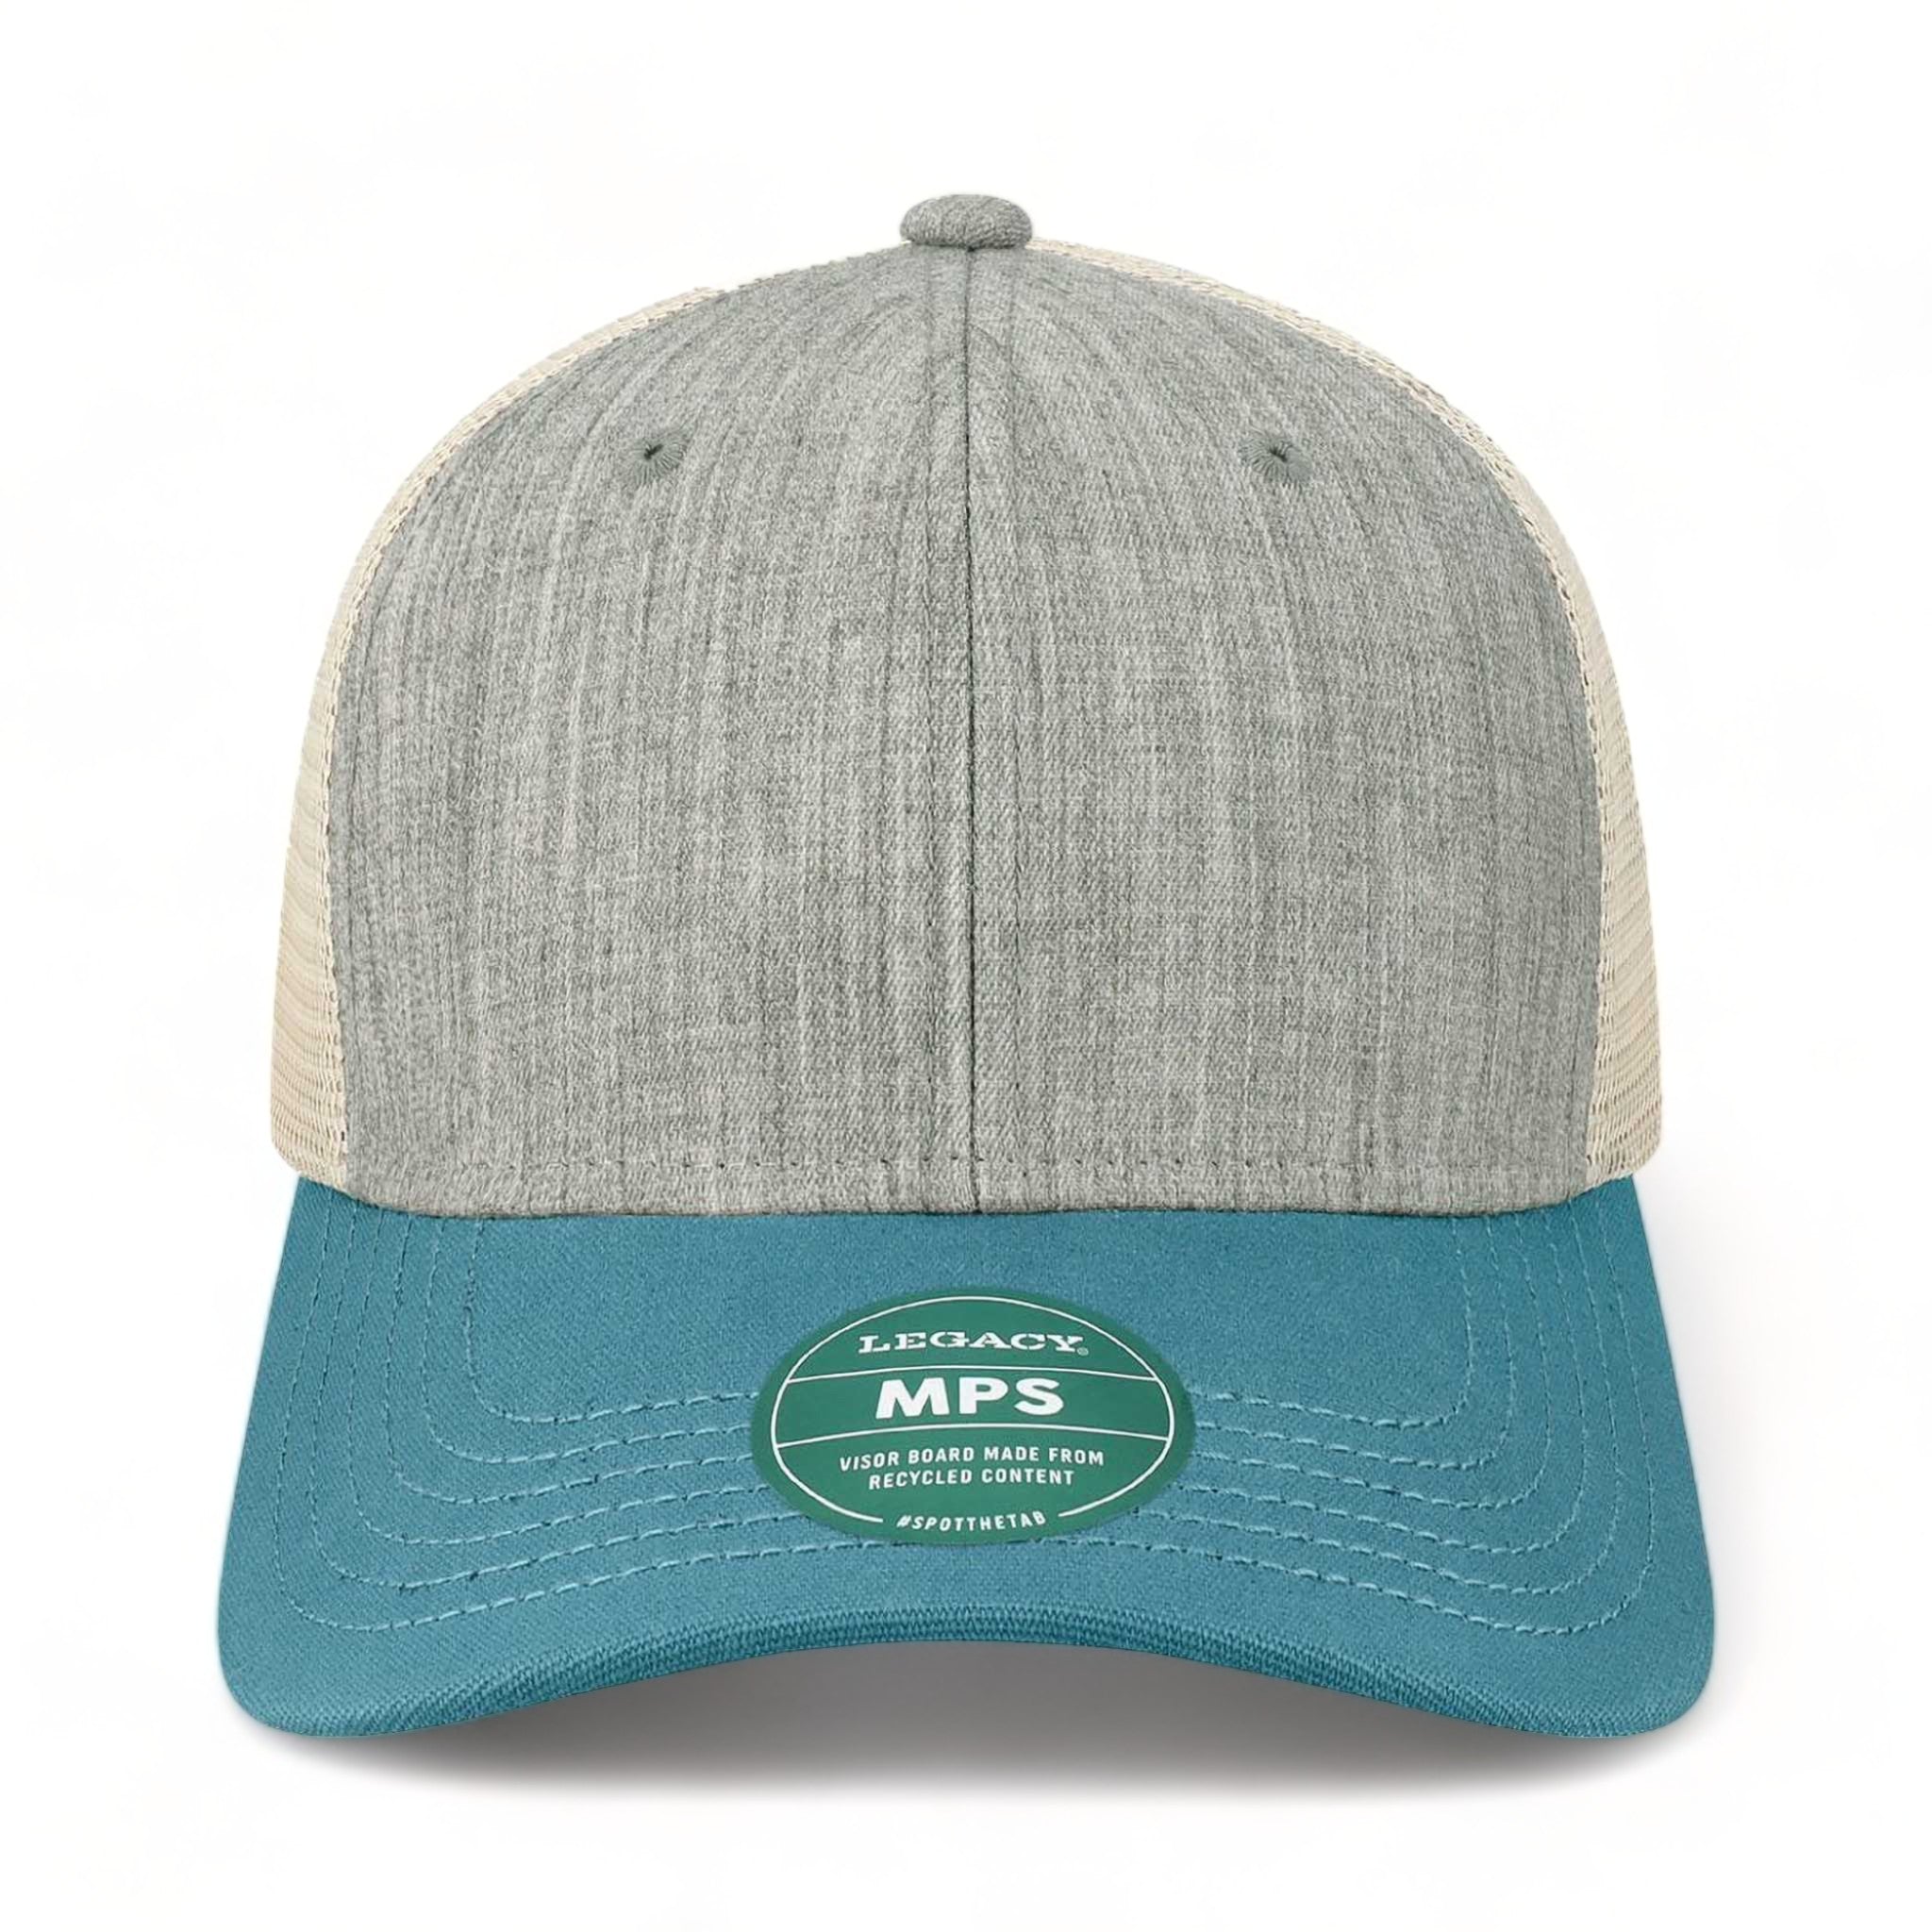 Front view of LEGACY MPS custom hat in mélange grey, pacific blue and stone